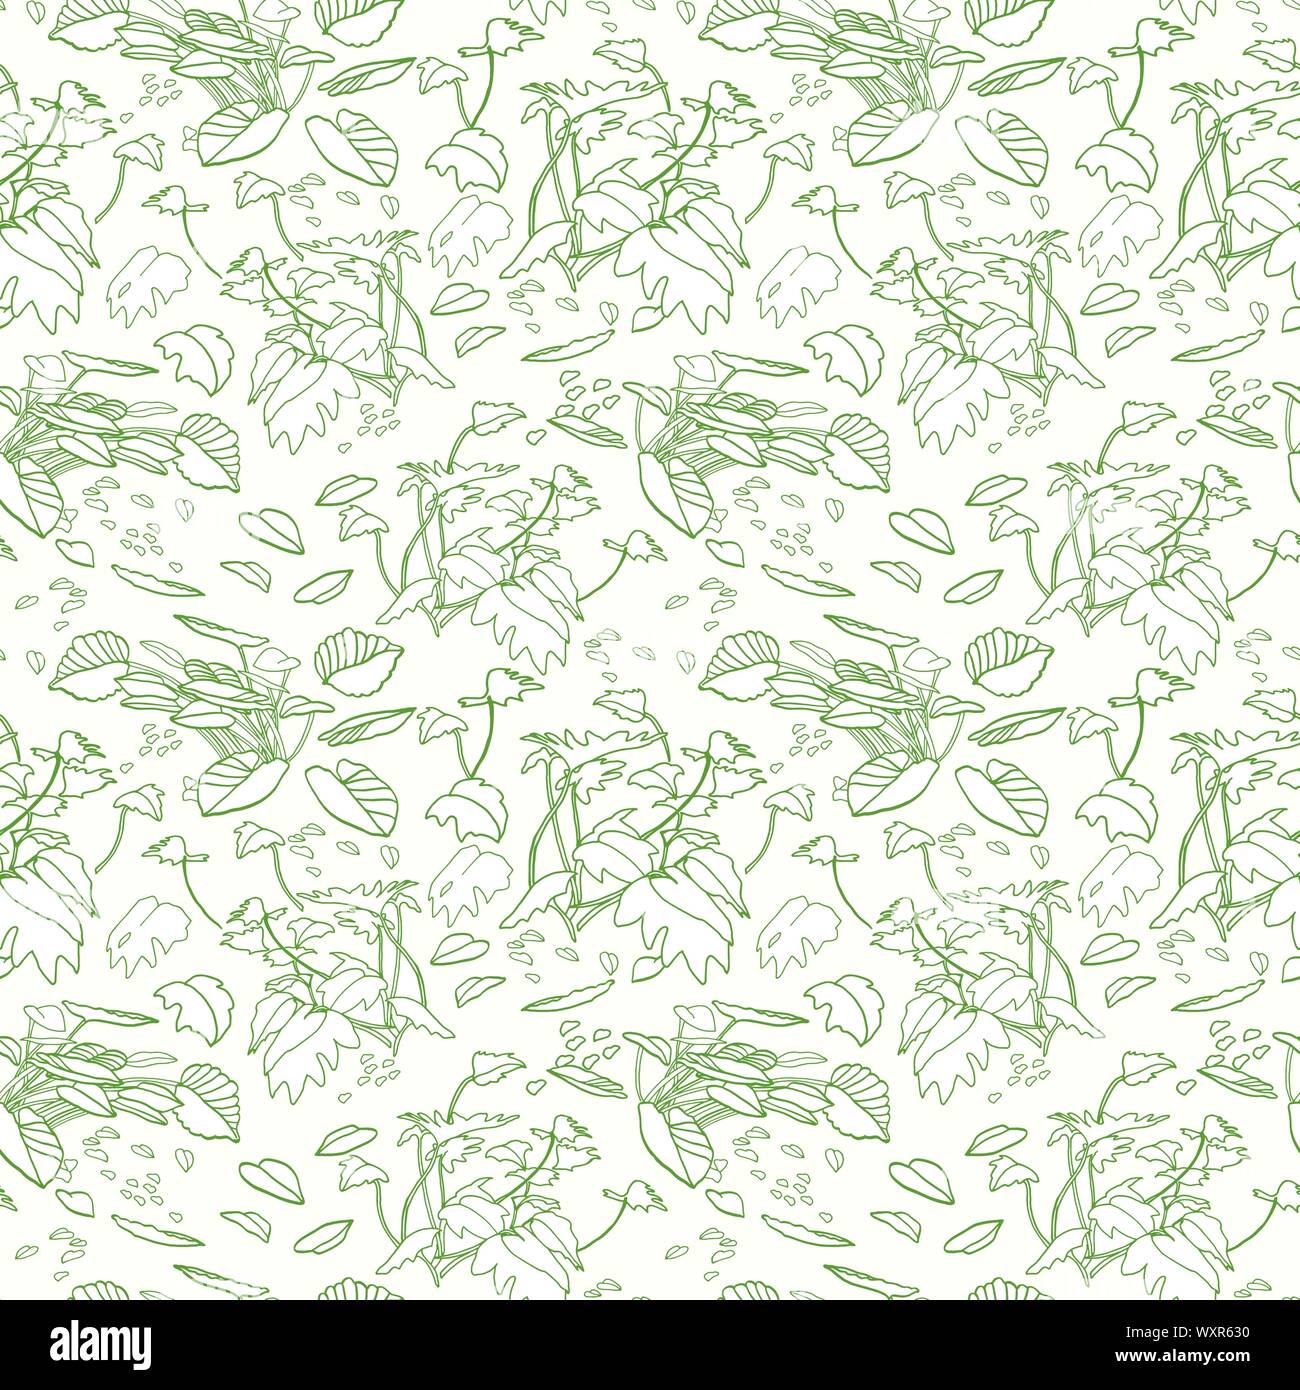 Modern exotic jungle leaf pattern. Scattered botanical leaf, line art doodle style, in pastel green tones. Perfect for packaging design, home decor, fabric wallpaper and stationary. Stock Vector